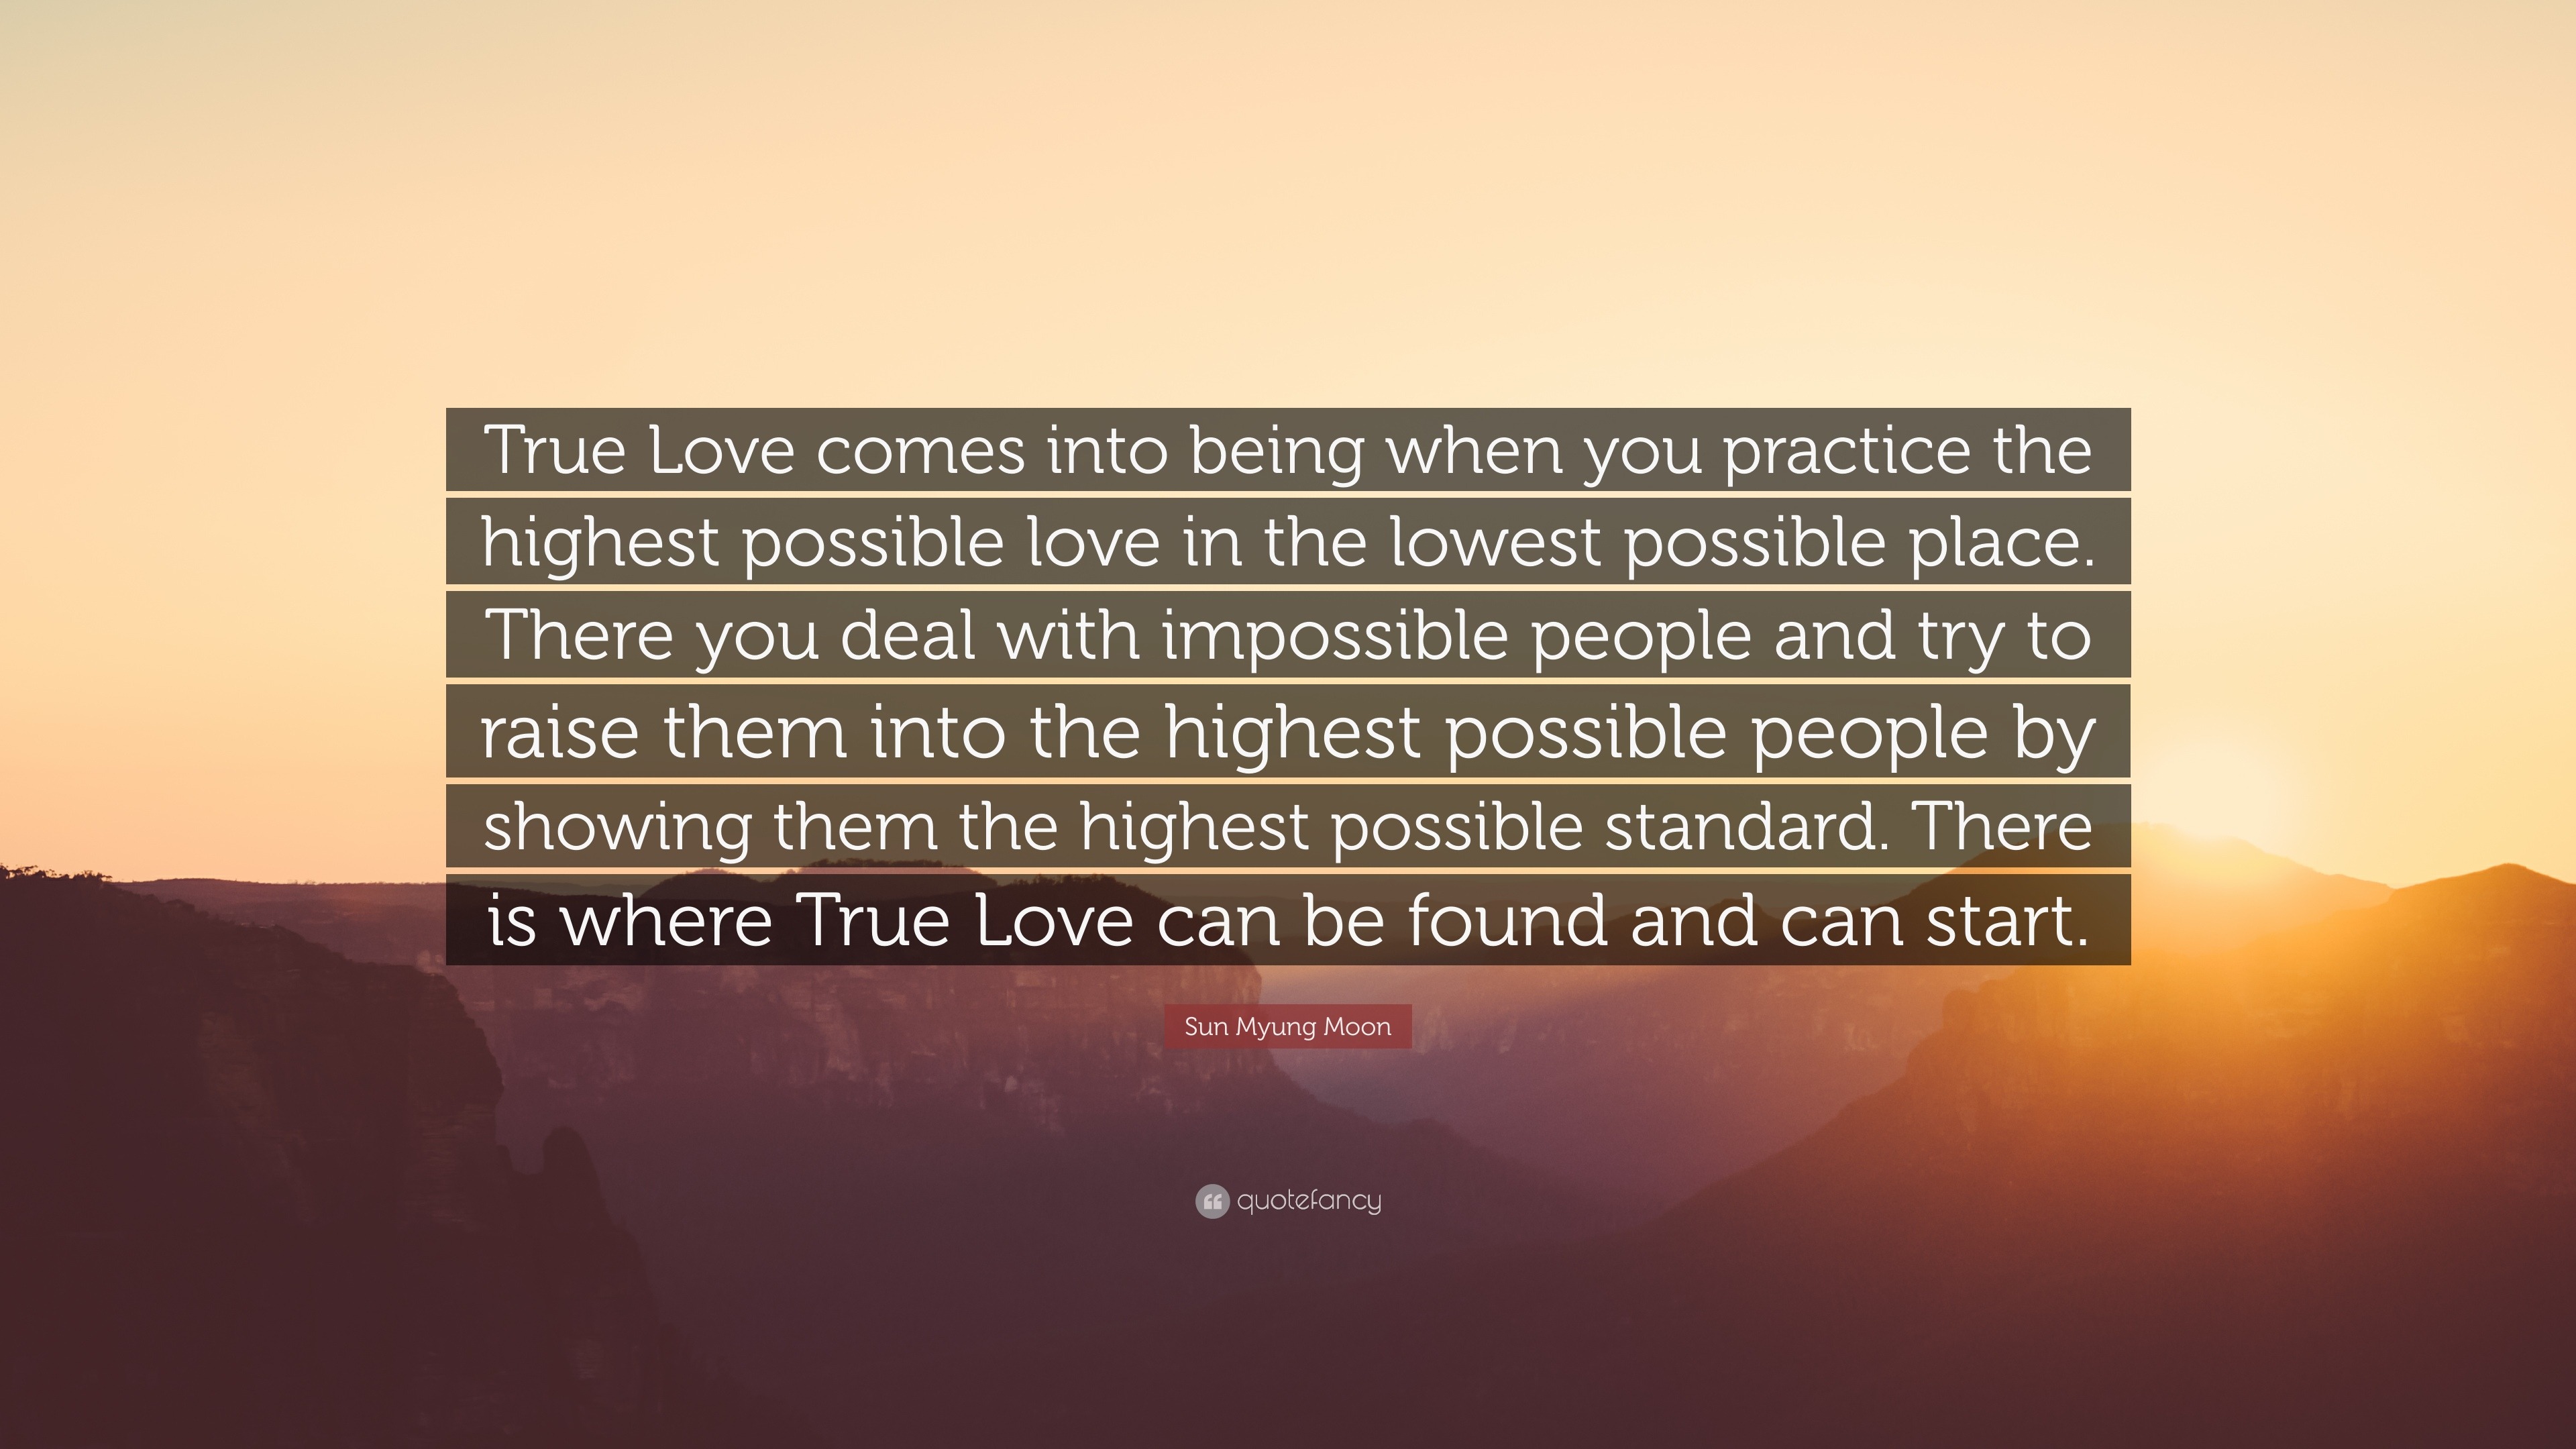 Sun Myung Moon Quote “True Love es into being when you practice the highest